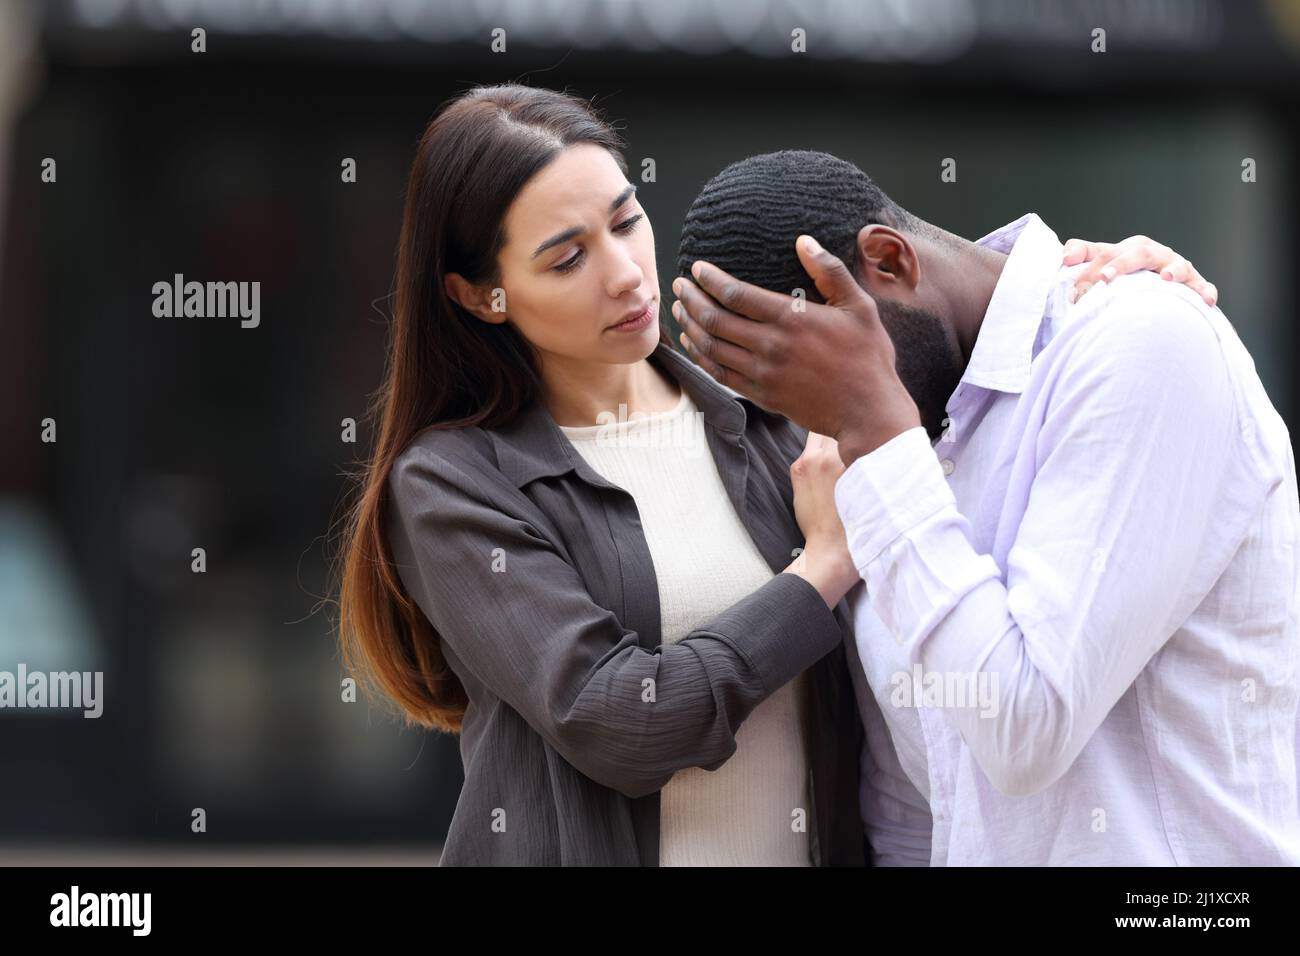 Worried woman comforting a sad friend in the street Stock Photo